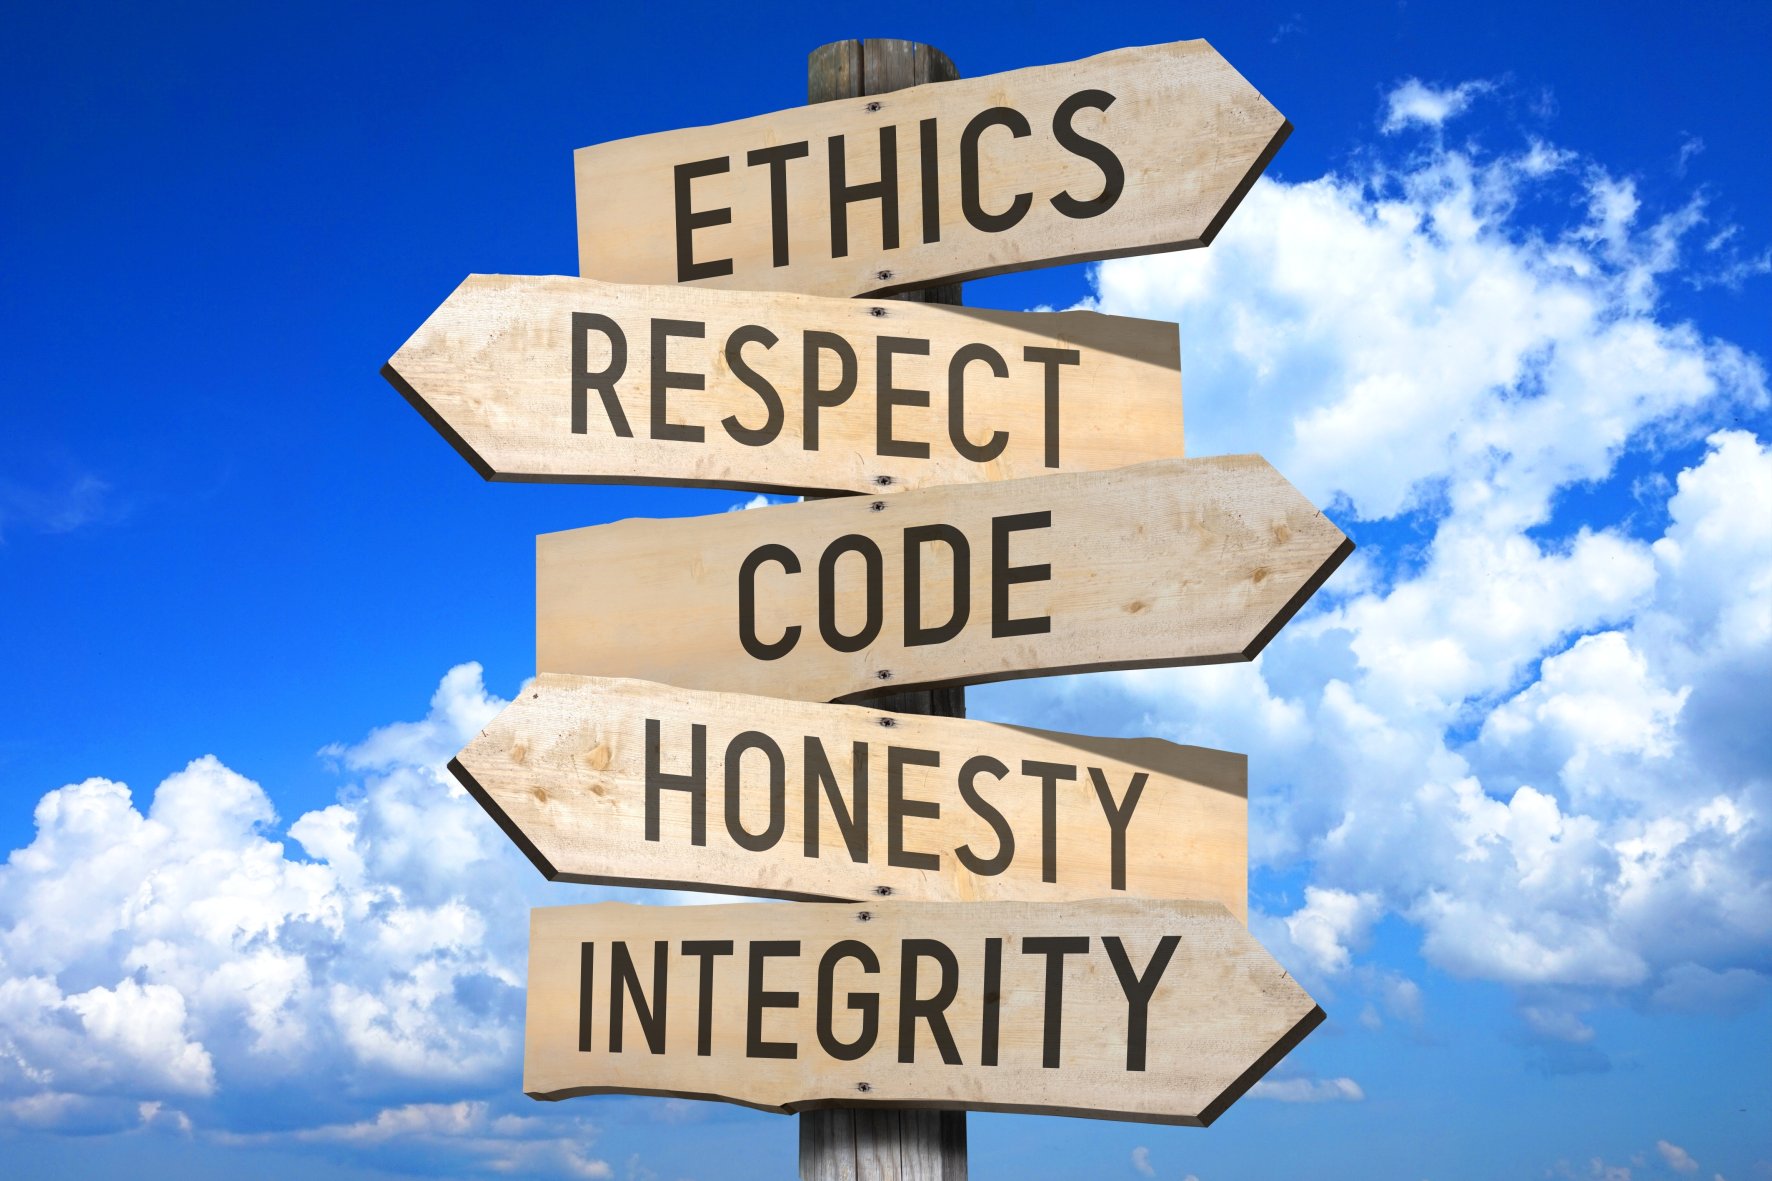 Wooden signpost - code of conduct (ethics, respect, code, honesty, integrity).